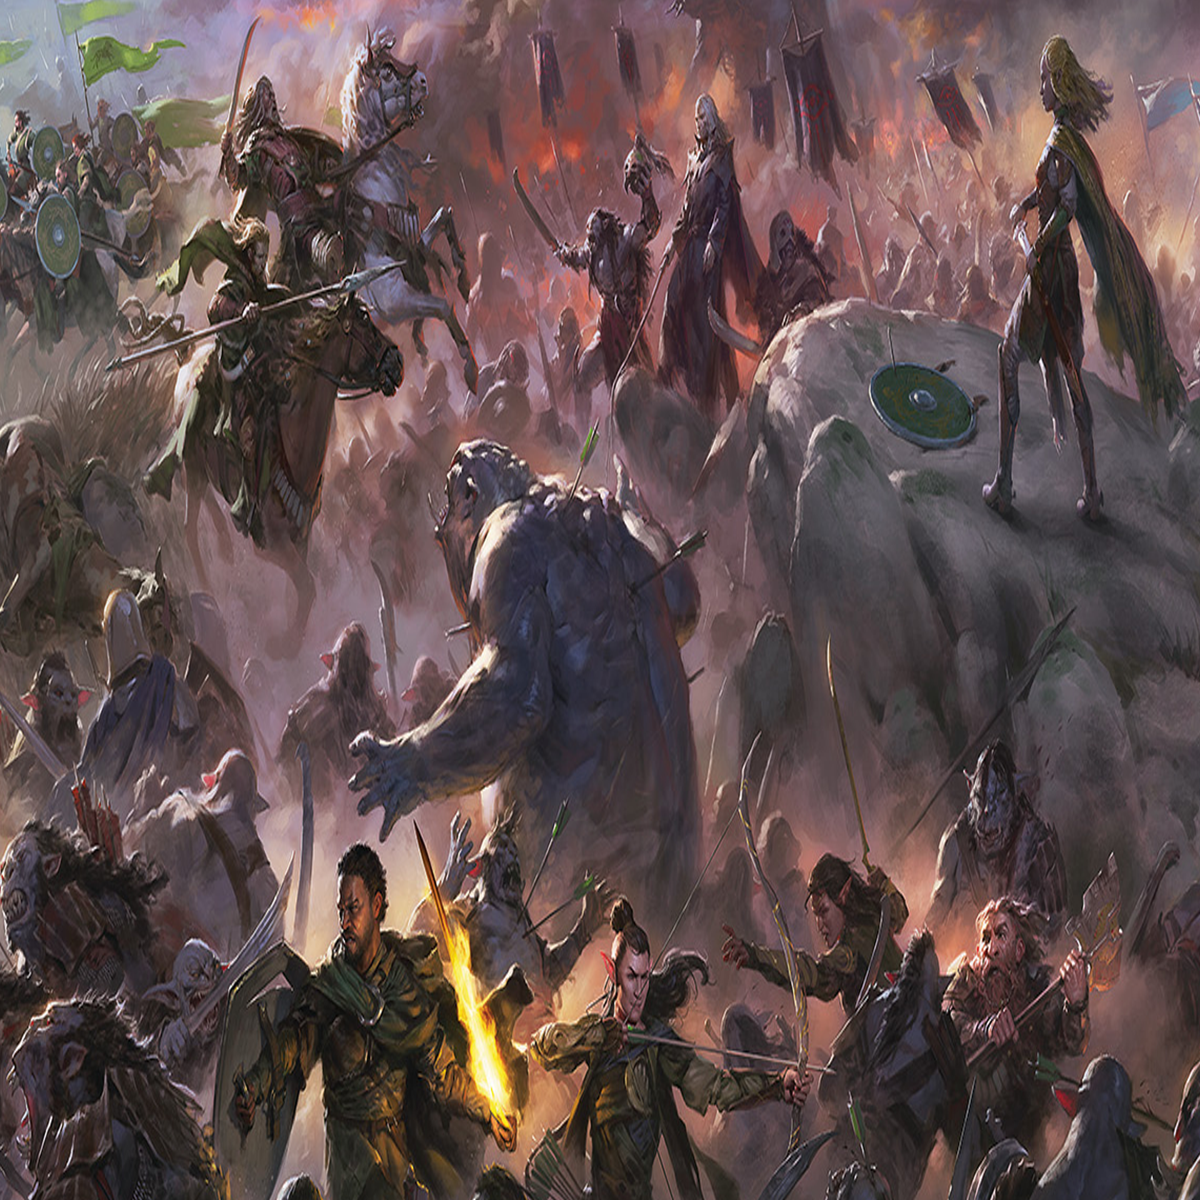 Minas Tirith  The Lord of the Rings: Tales of Middle-earth Variants